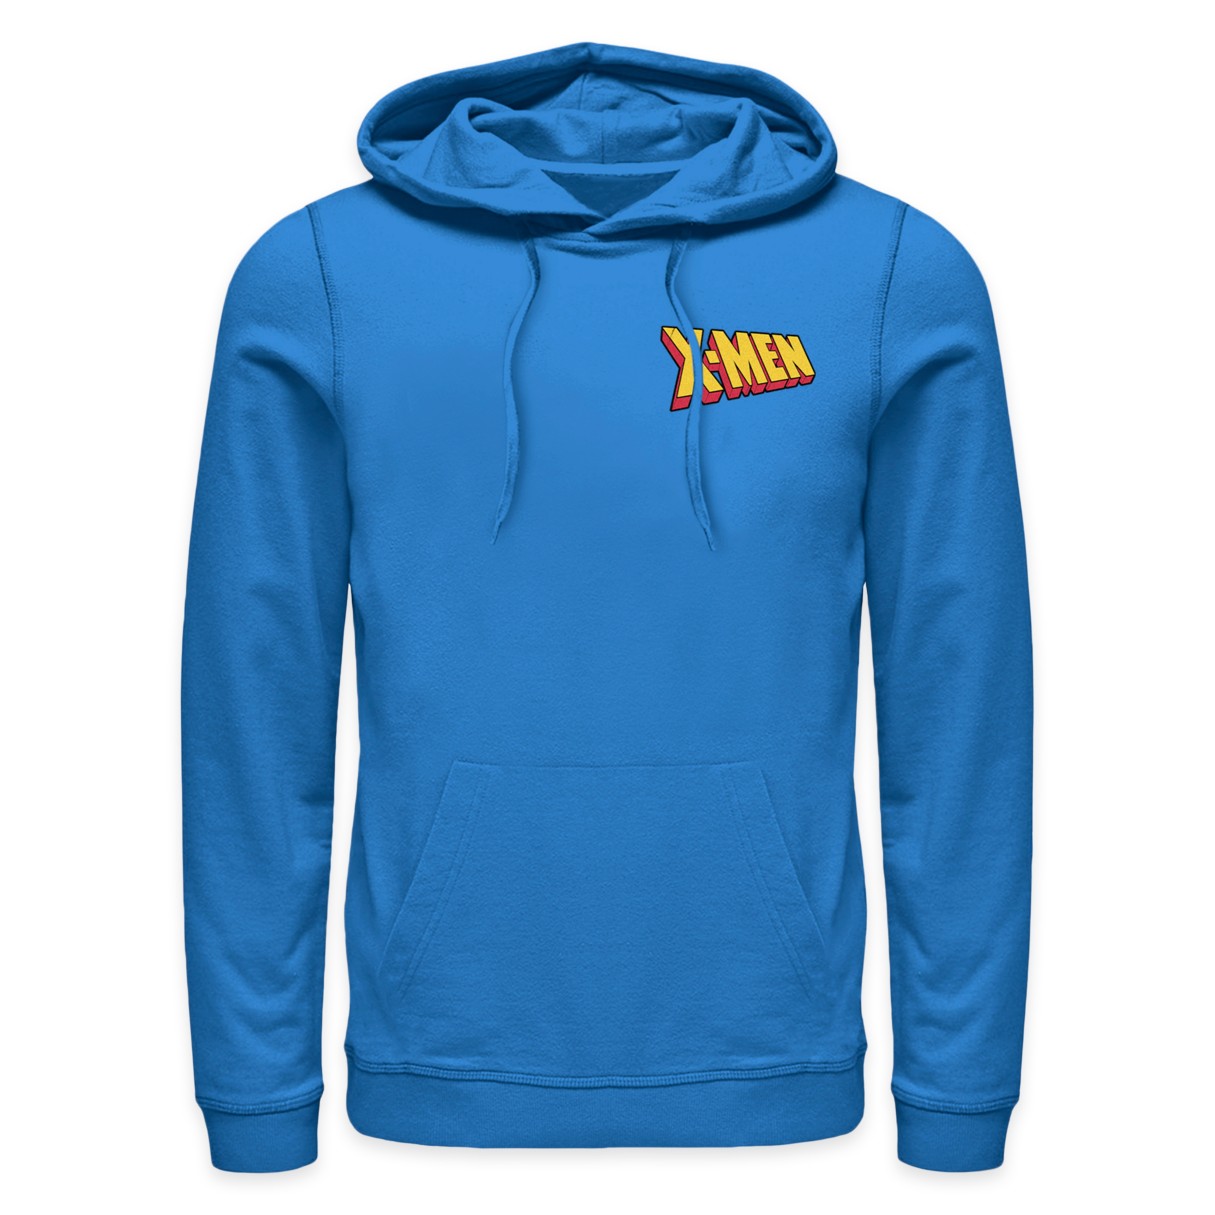 X-Men Logo Pullover Hoodie for Adults